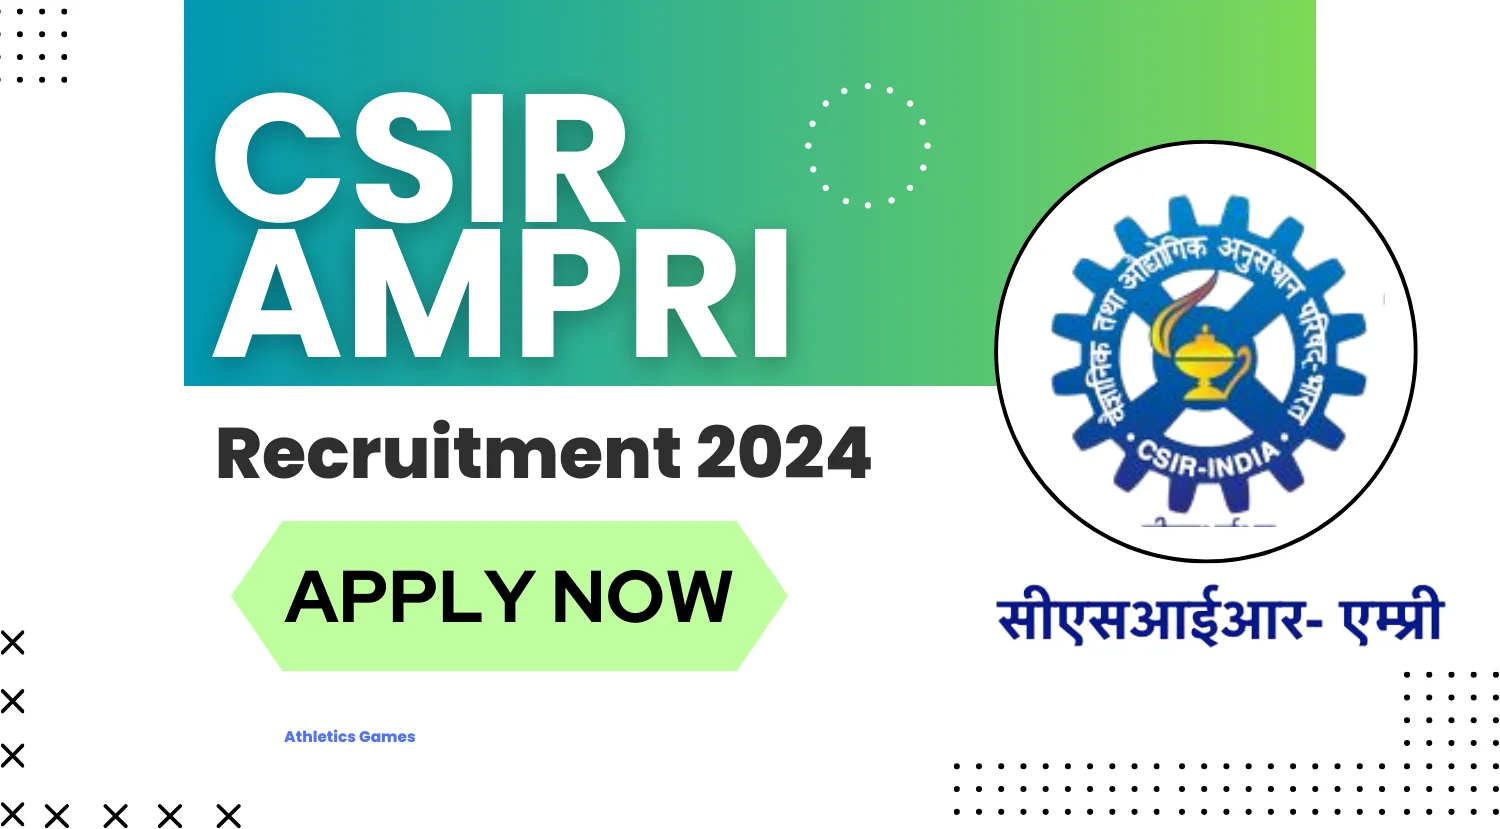 CSIR AMPRI Recruitment 2024, Apply Online Now for Assistant and Associate Posts